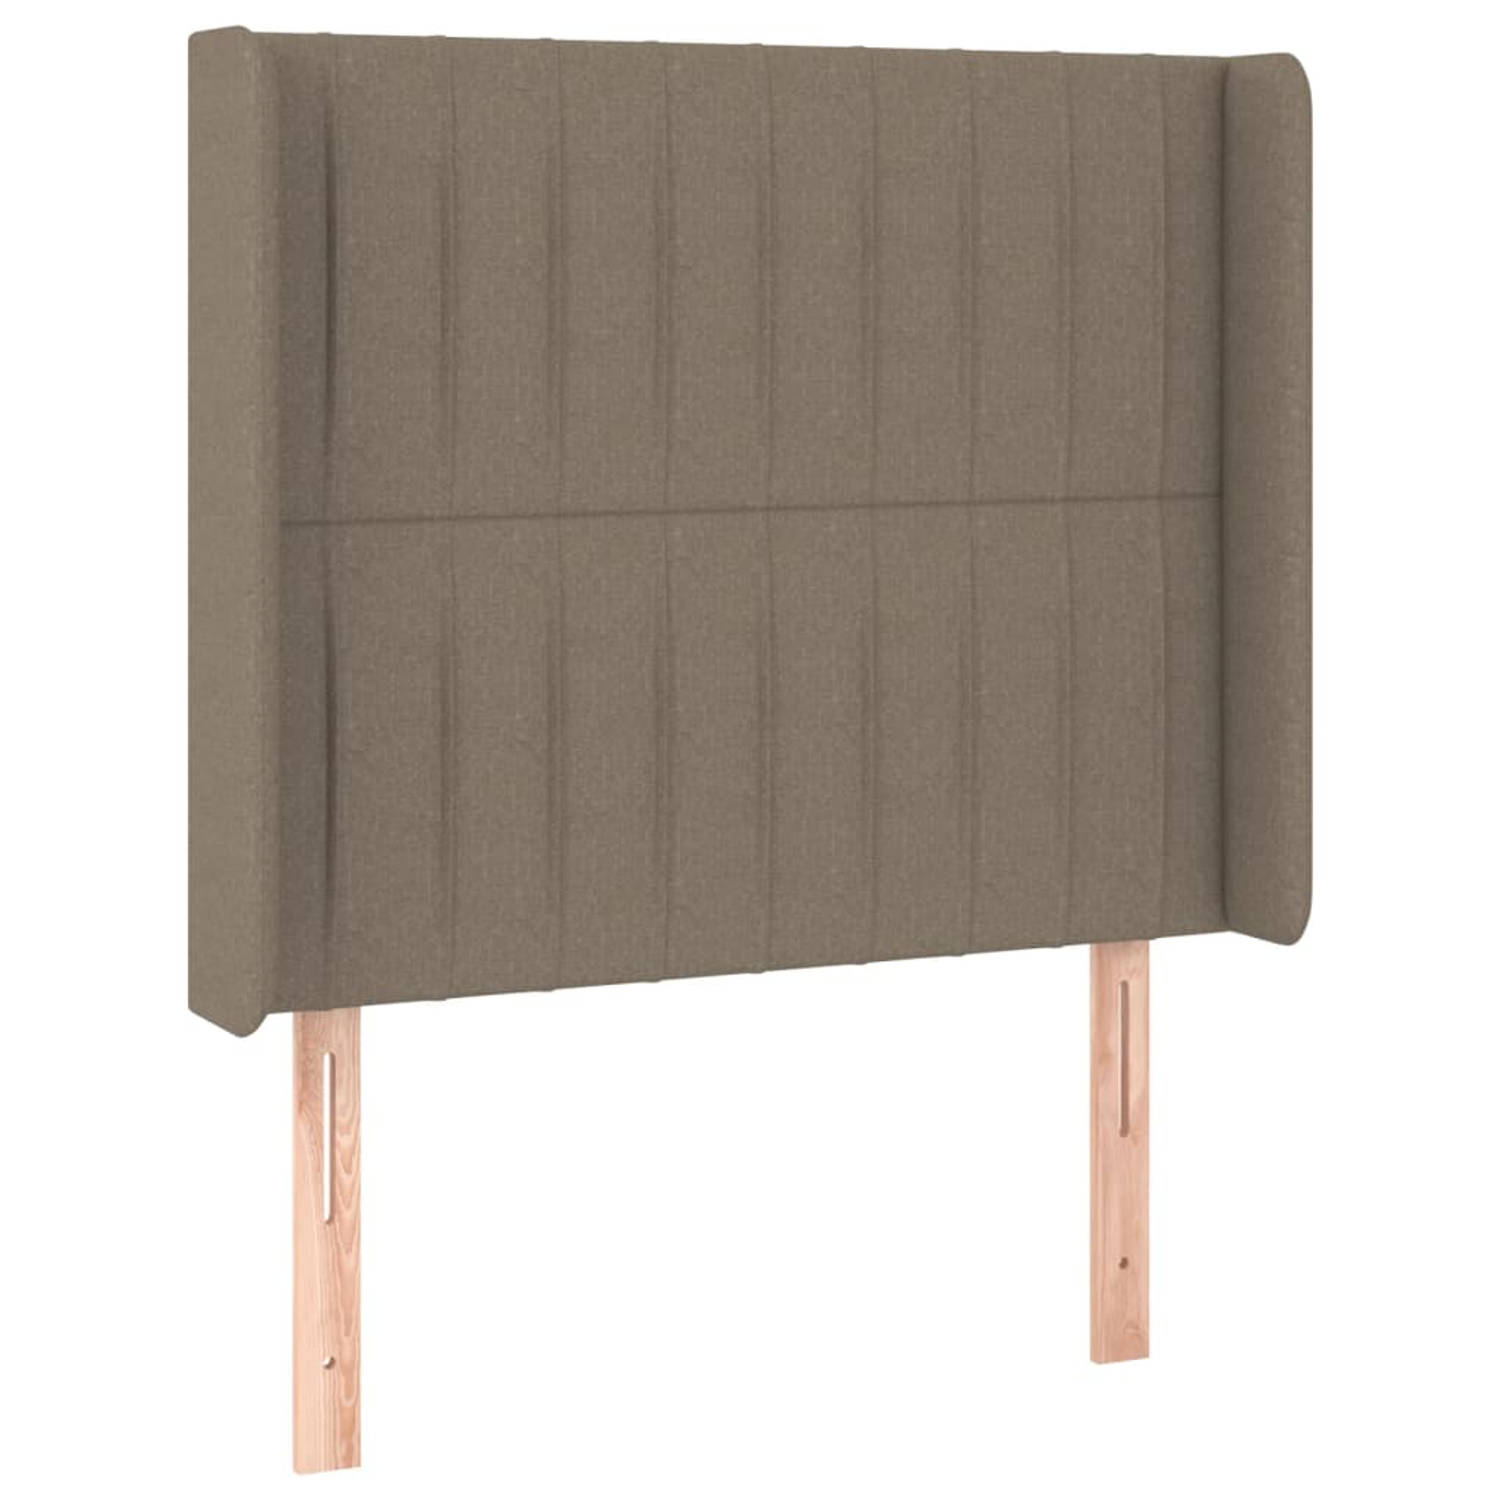 The Living Store Hoofdeind - 93x16x118/128 cm - Taupe